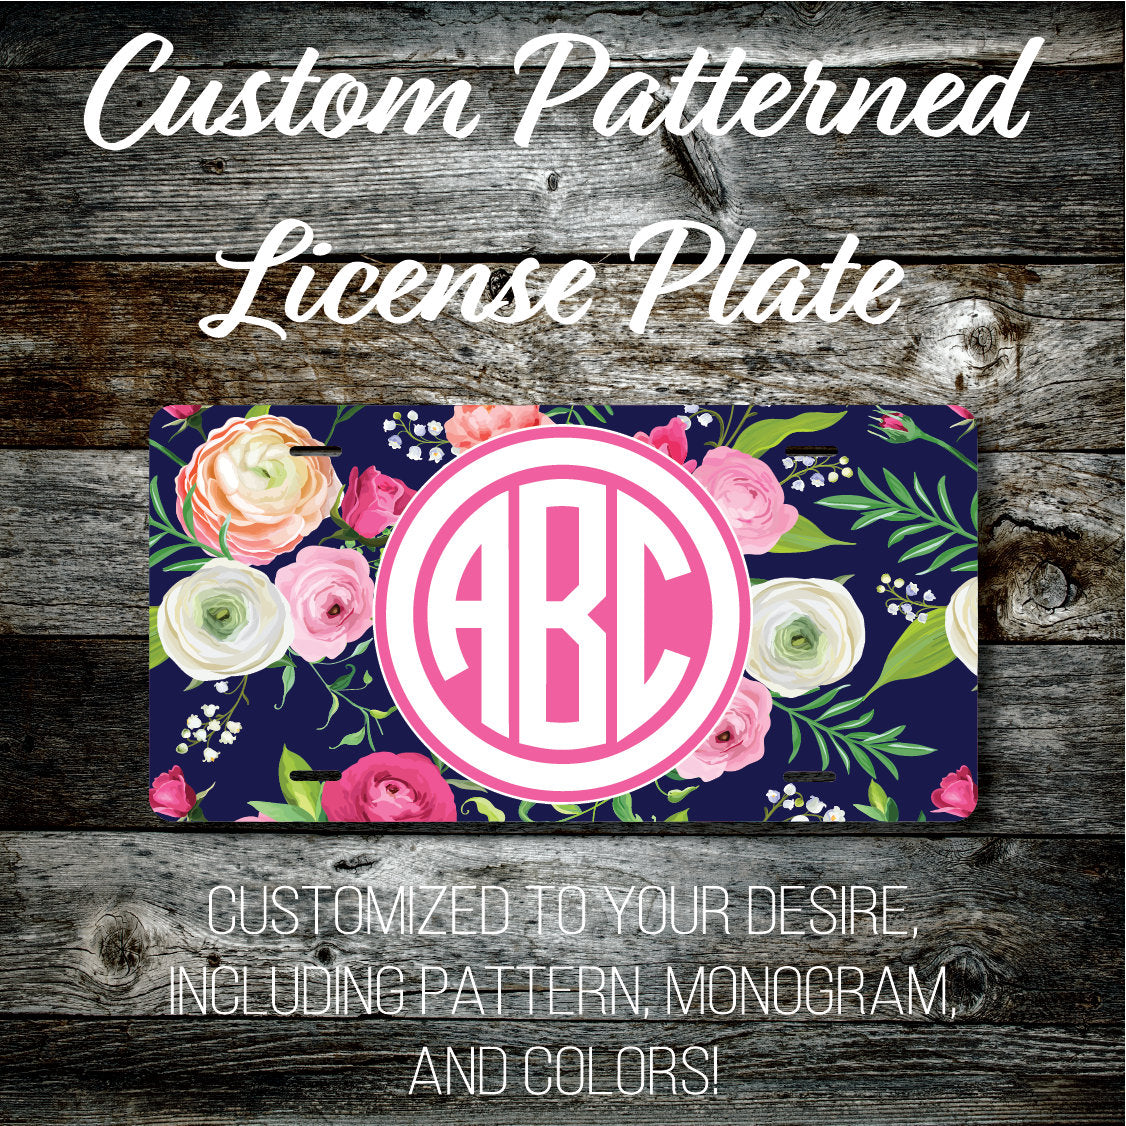 Personalized Monogrammed Custom License Plate (Pattern #267), Car Tag, Vanity license plate, Floral & Stripes Watercolor